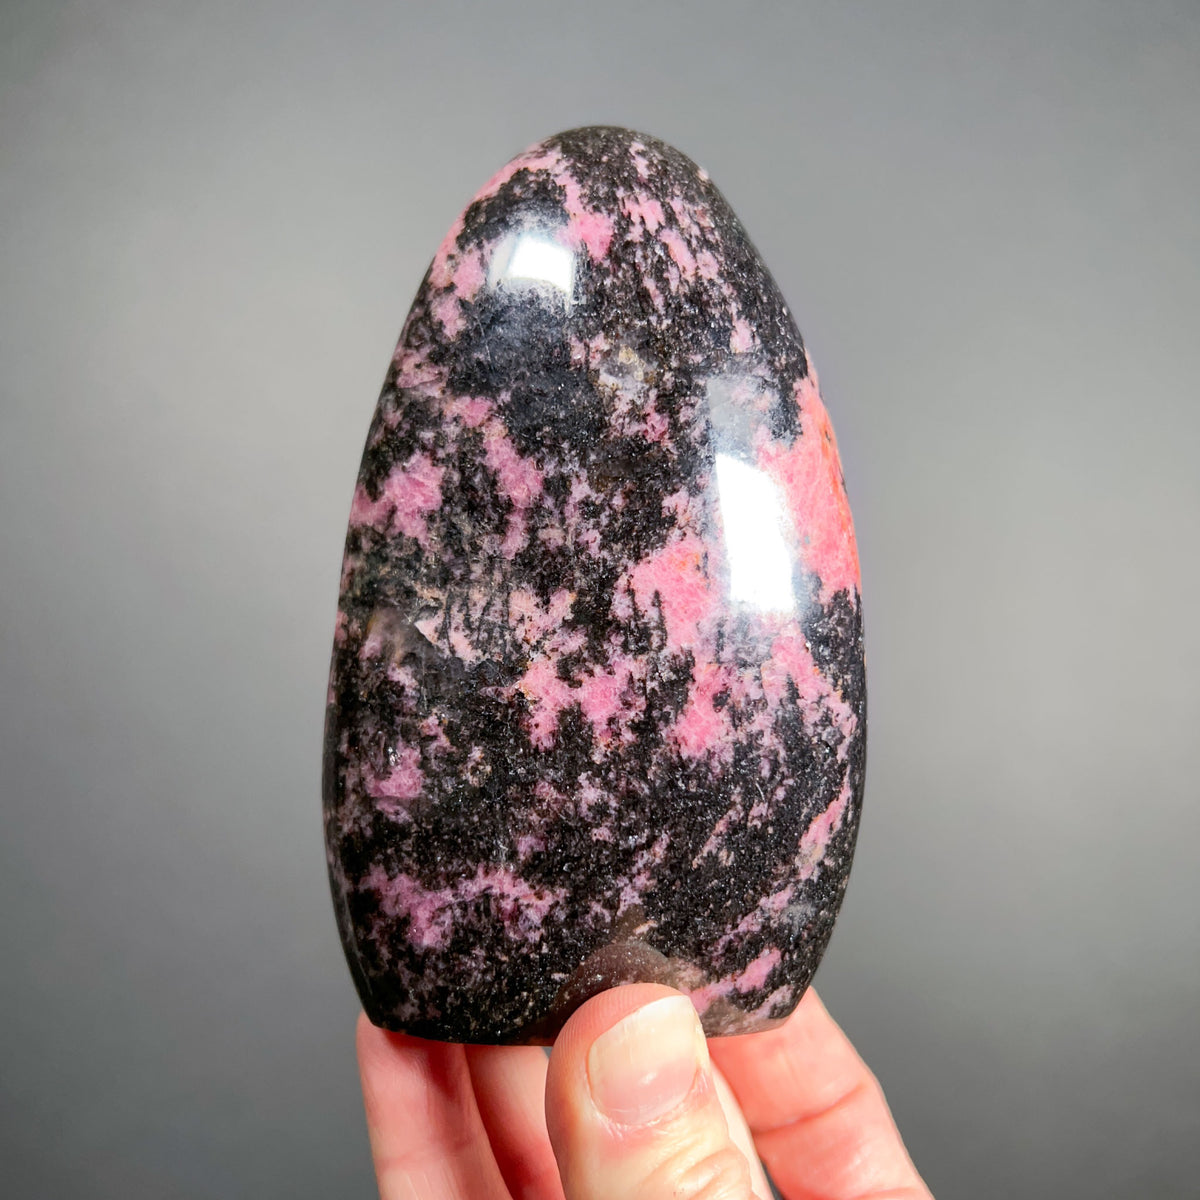 Polished Black and Pink Rhodonite Stone